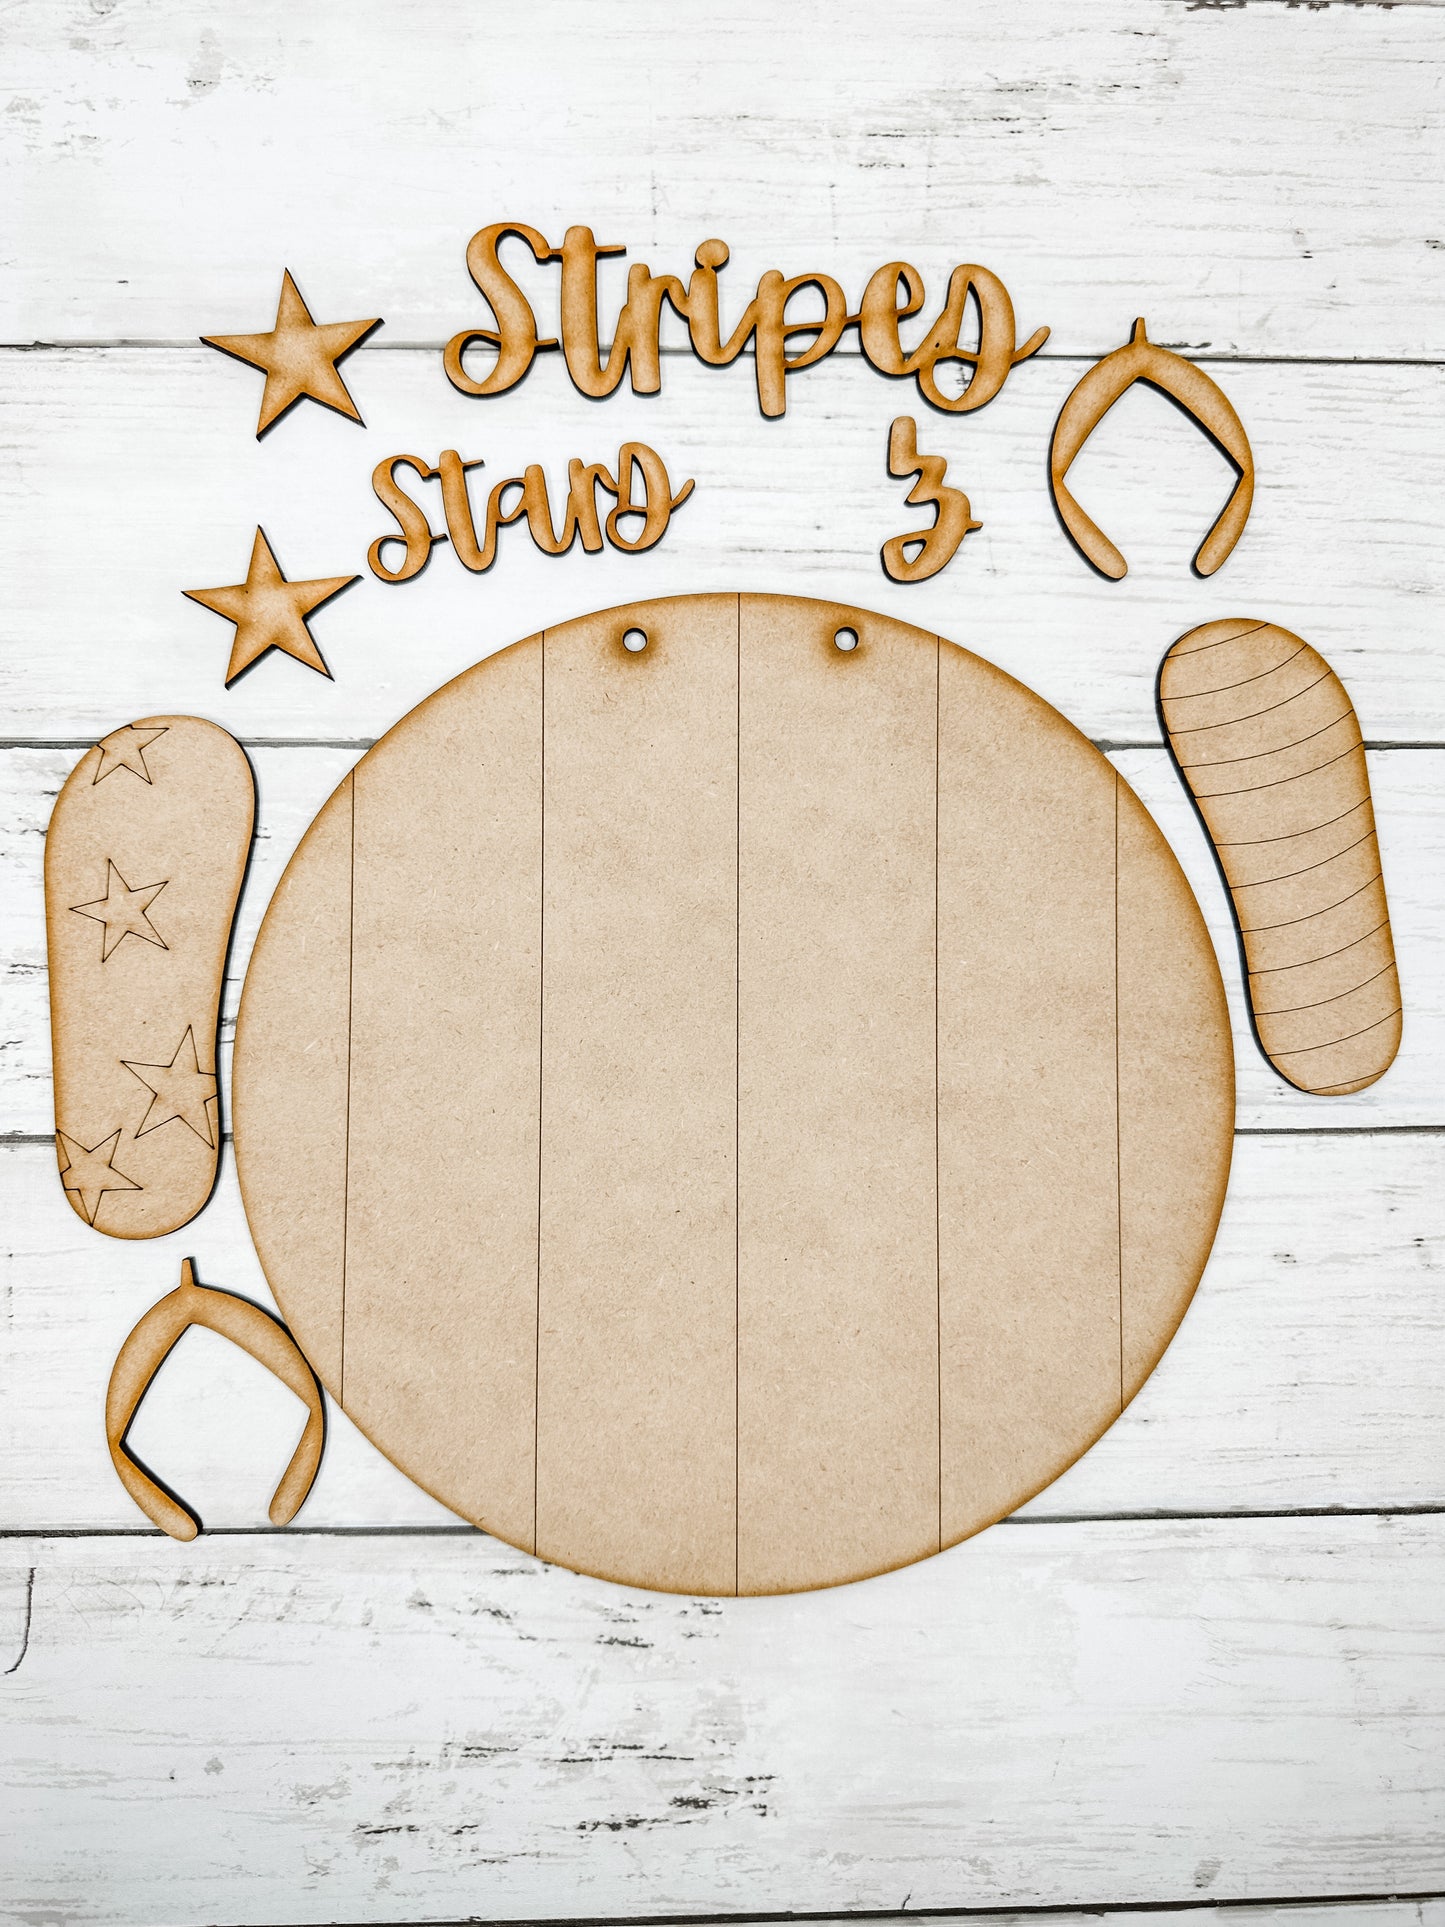 9 in round Flip Flop Stars and Stripes Sign DIY Kit